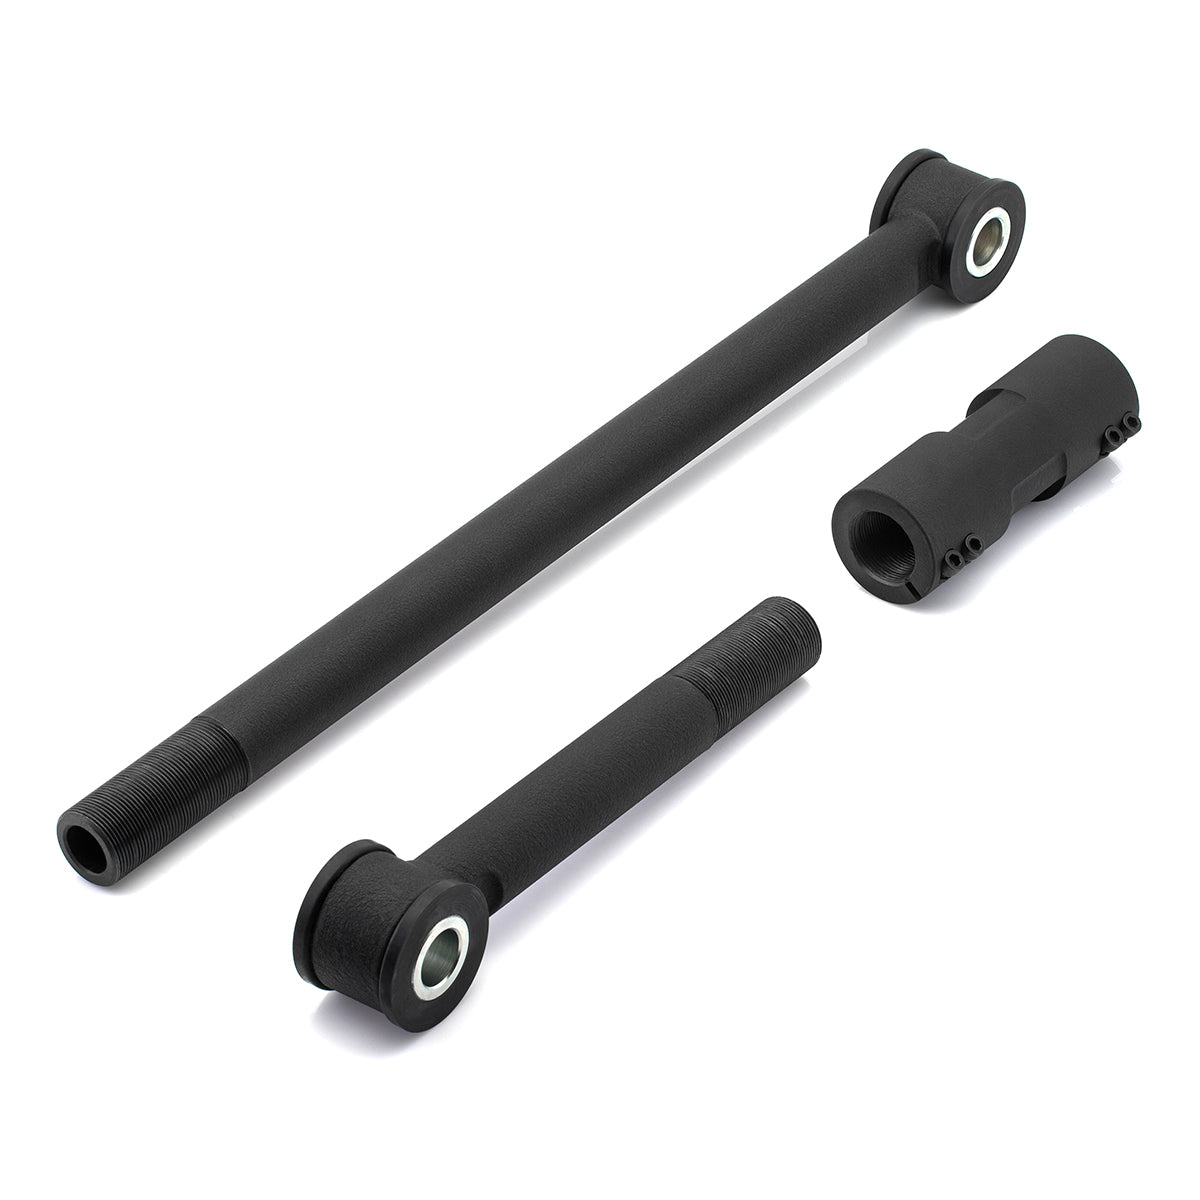 2000-2005 Ford Excursion Adjustable Track Bar for 2-6" Lifts with Bump Stops